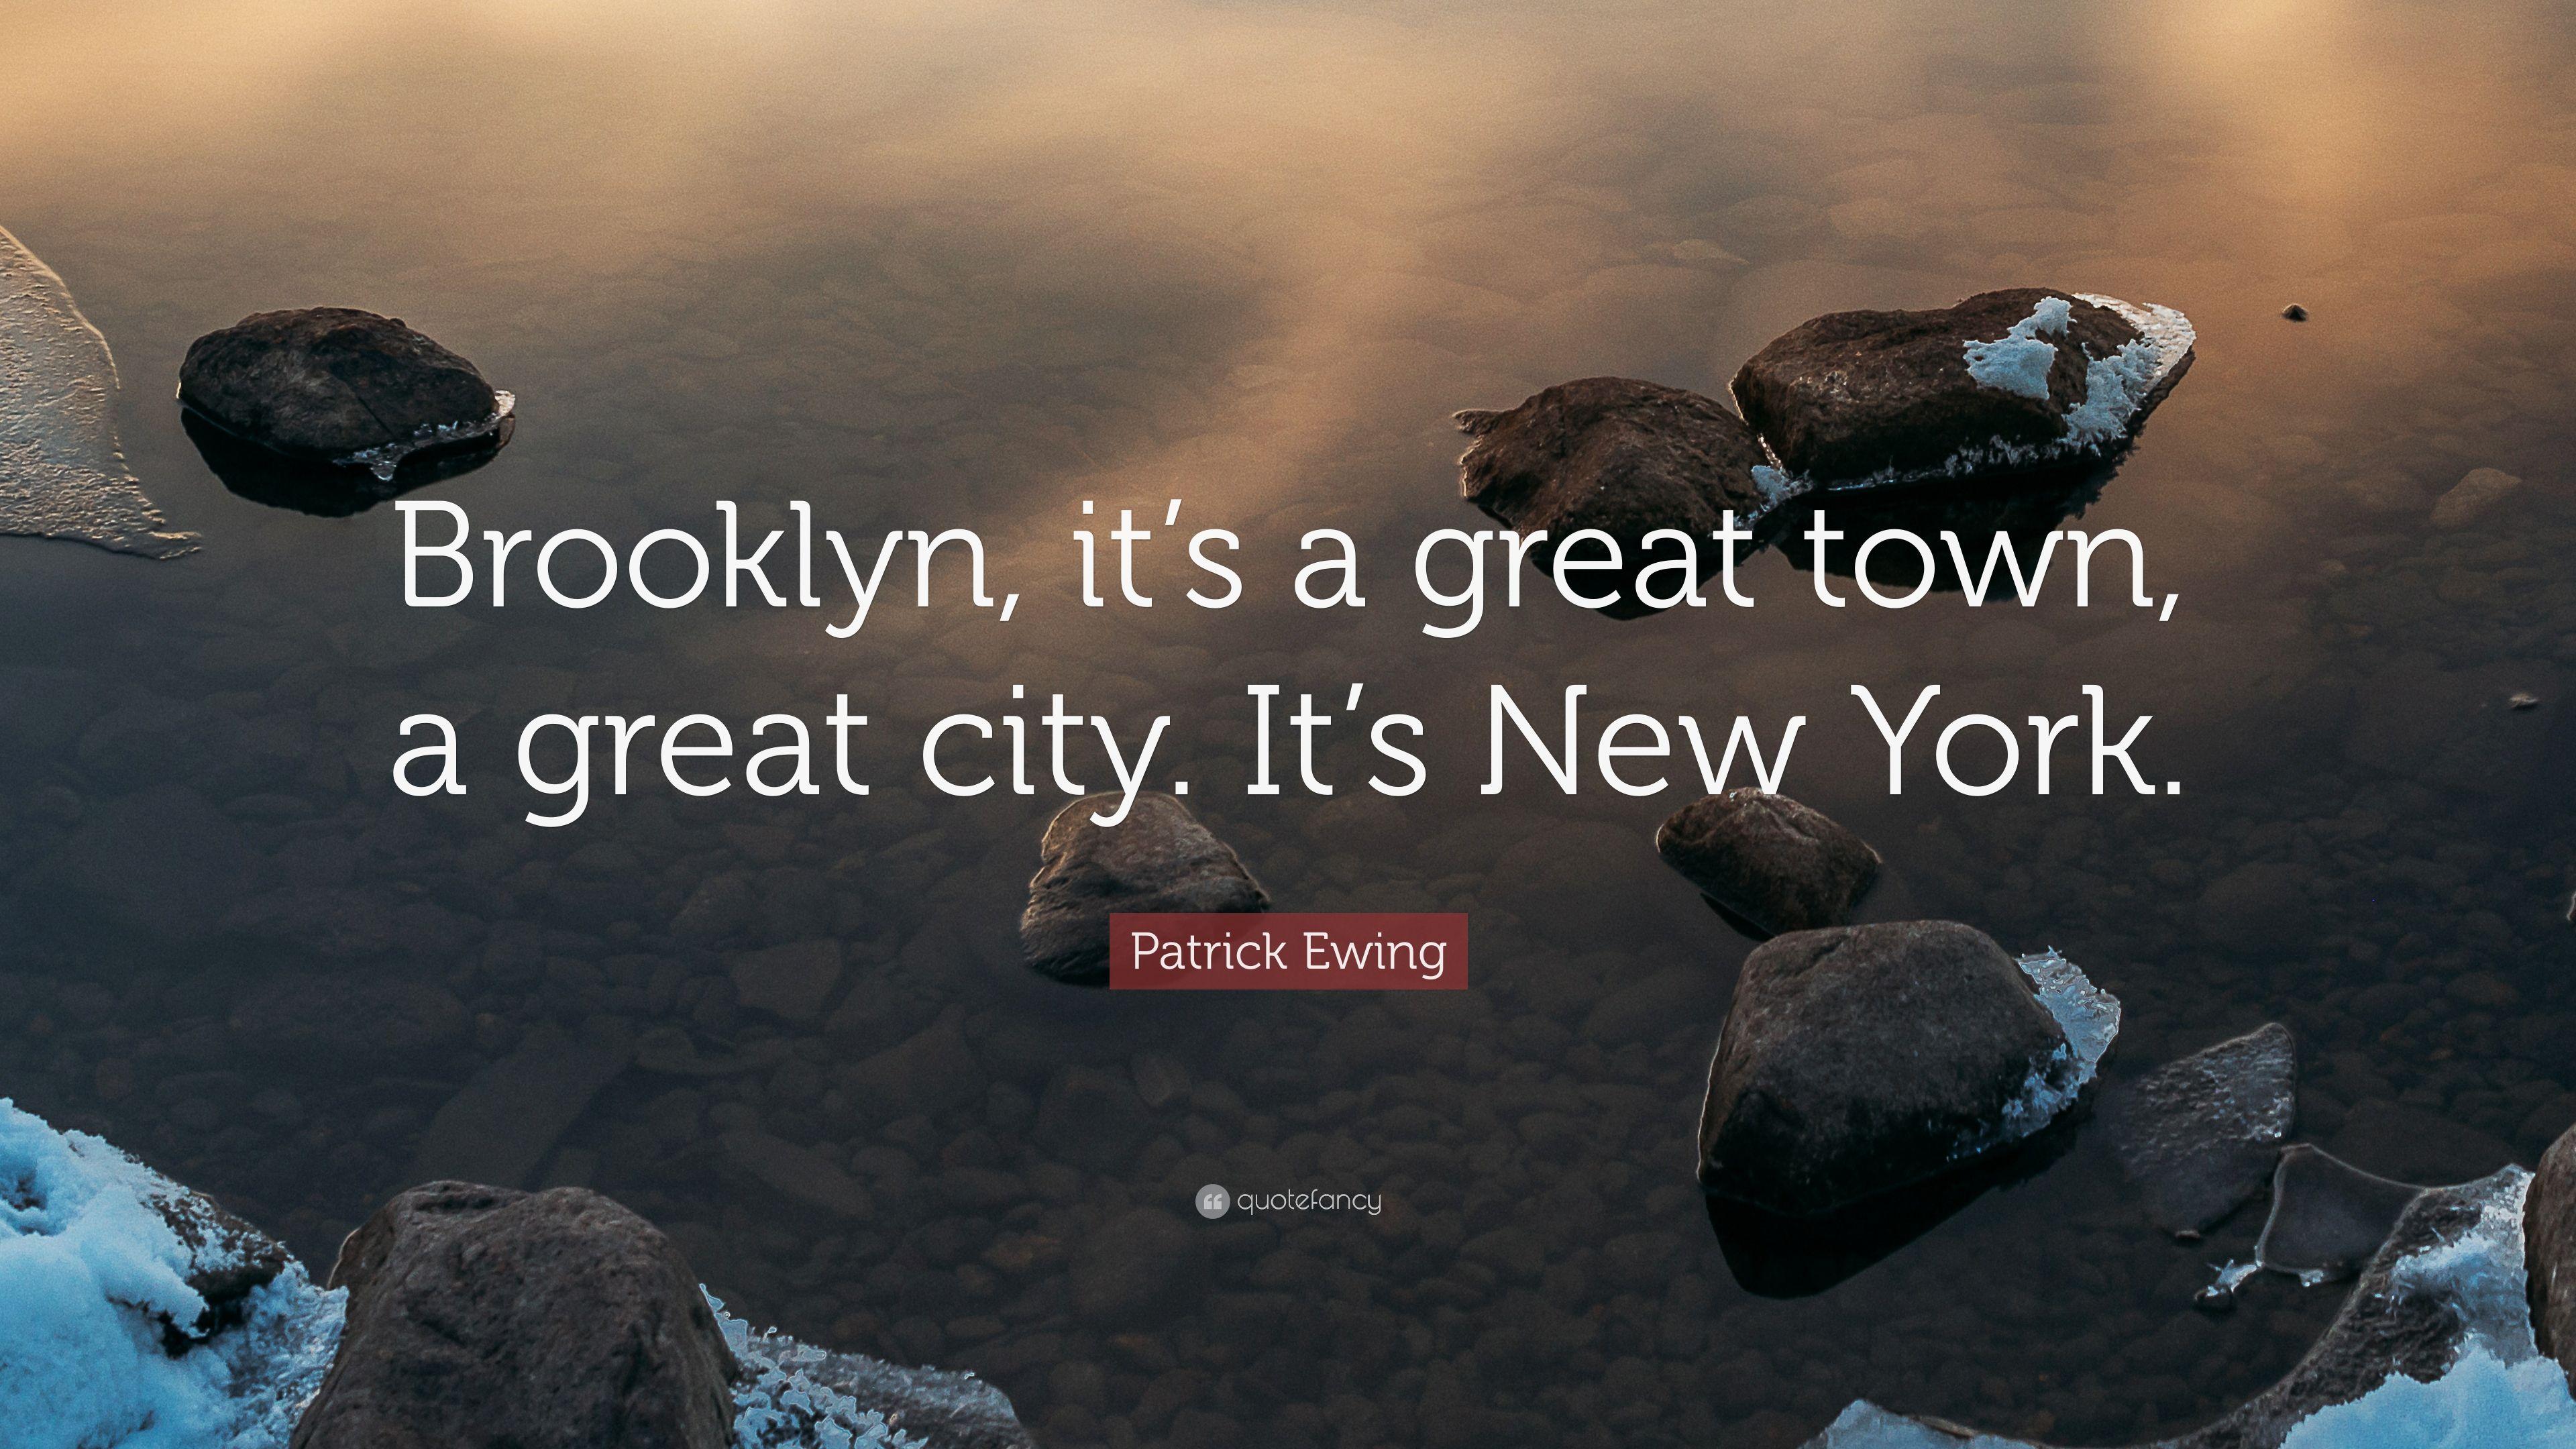 Patrick Ewing Quote: “Brooklyn, it's a great town, a great city